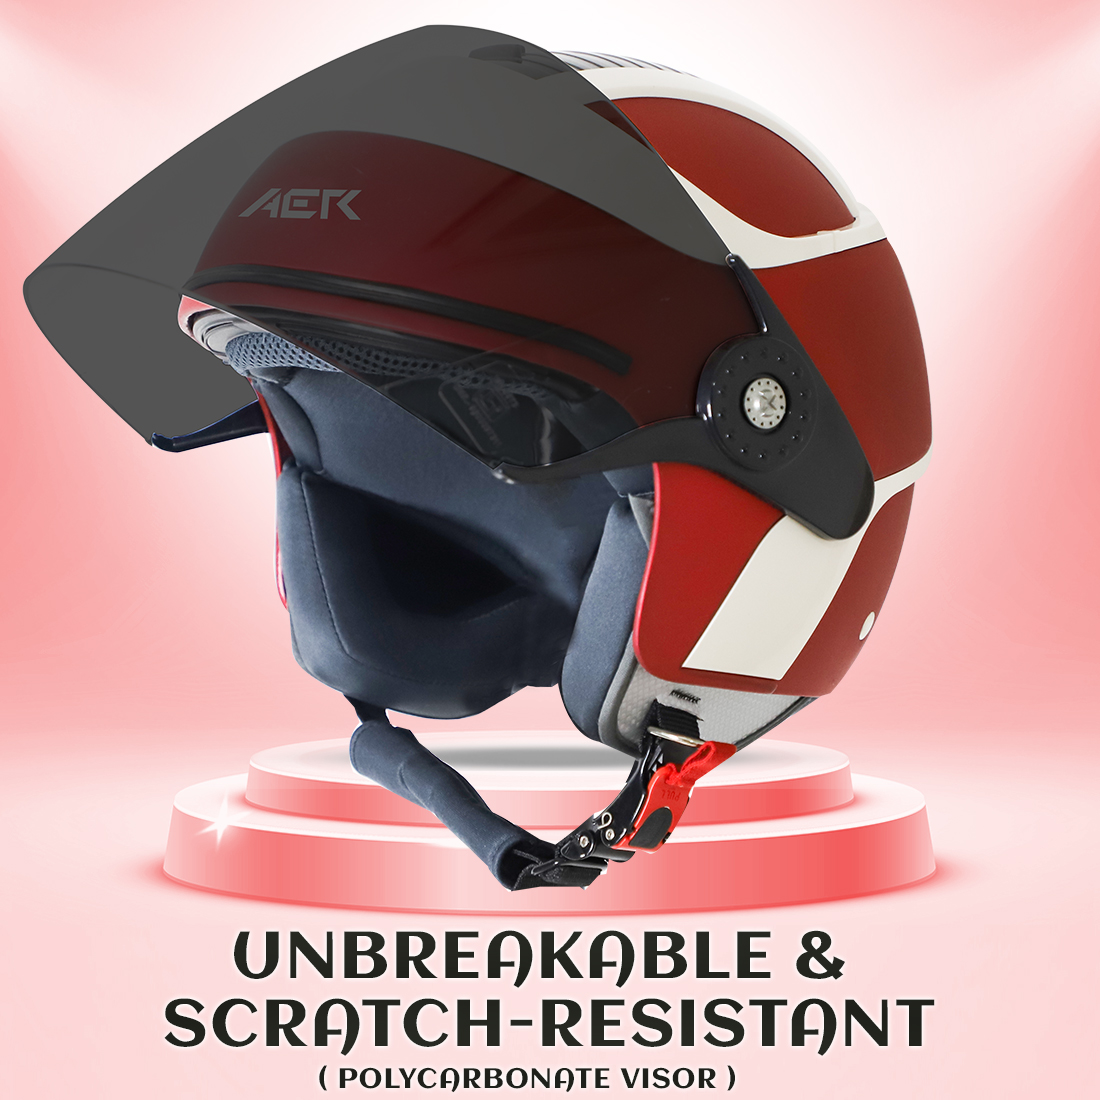 Steelbird SB-29 AER ISI Certified Helmet For Men And Women (Glossy Cherry Red Off White With Smoke Visor)